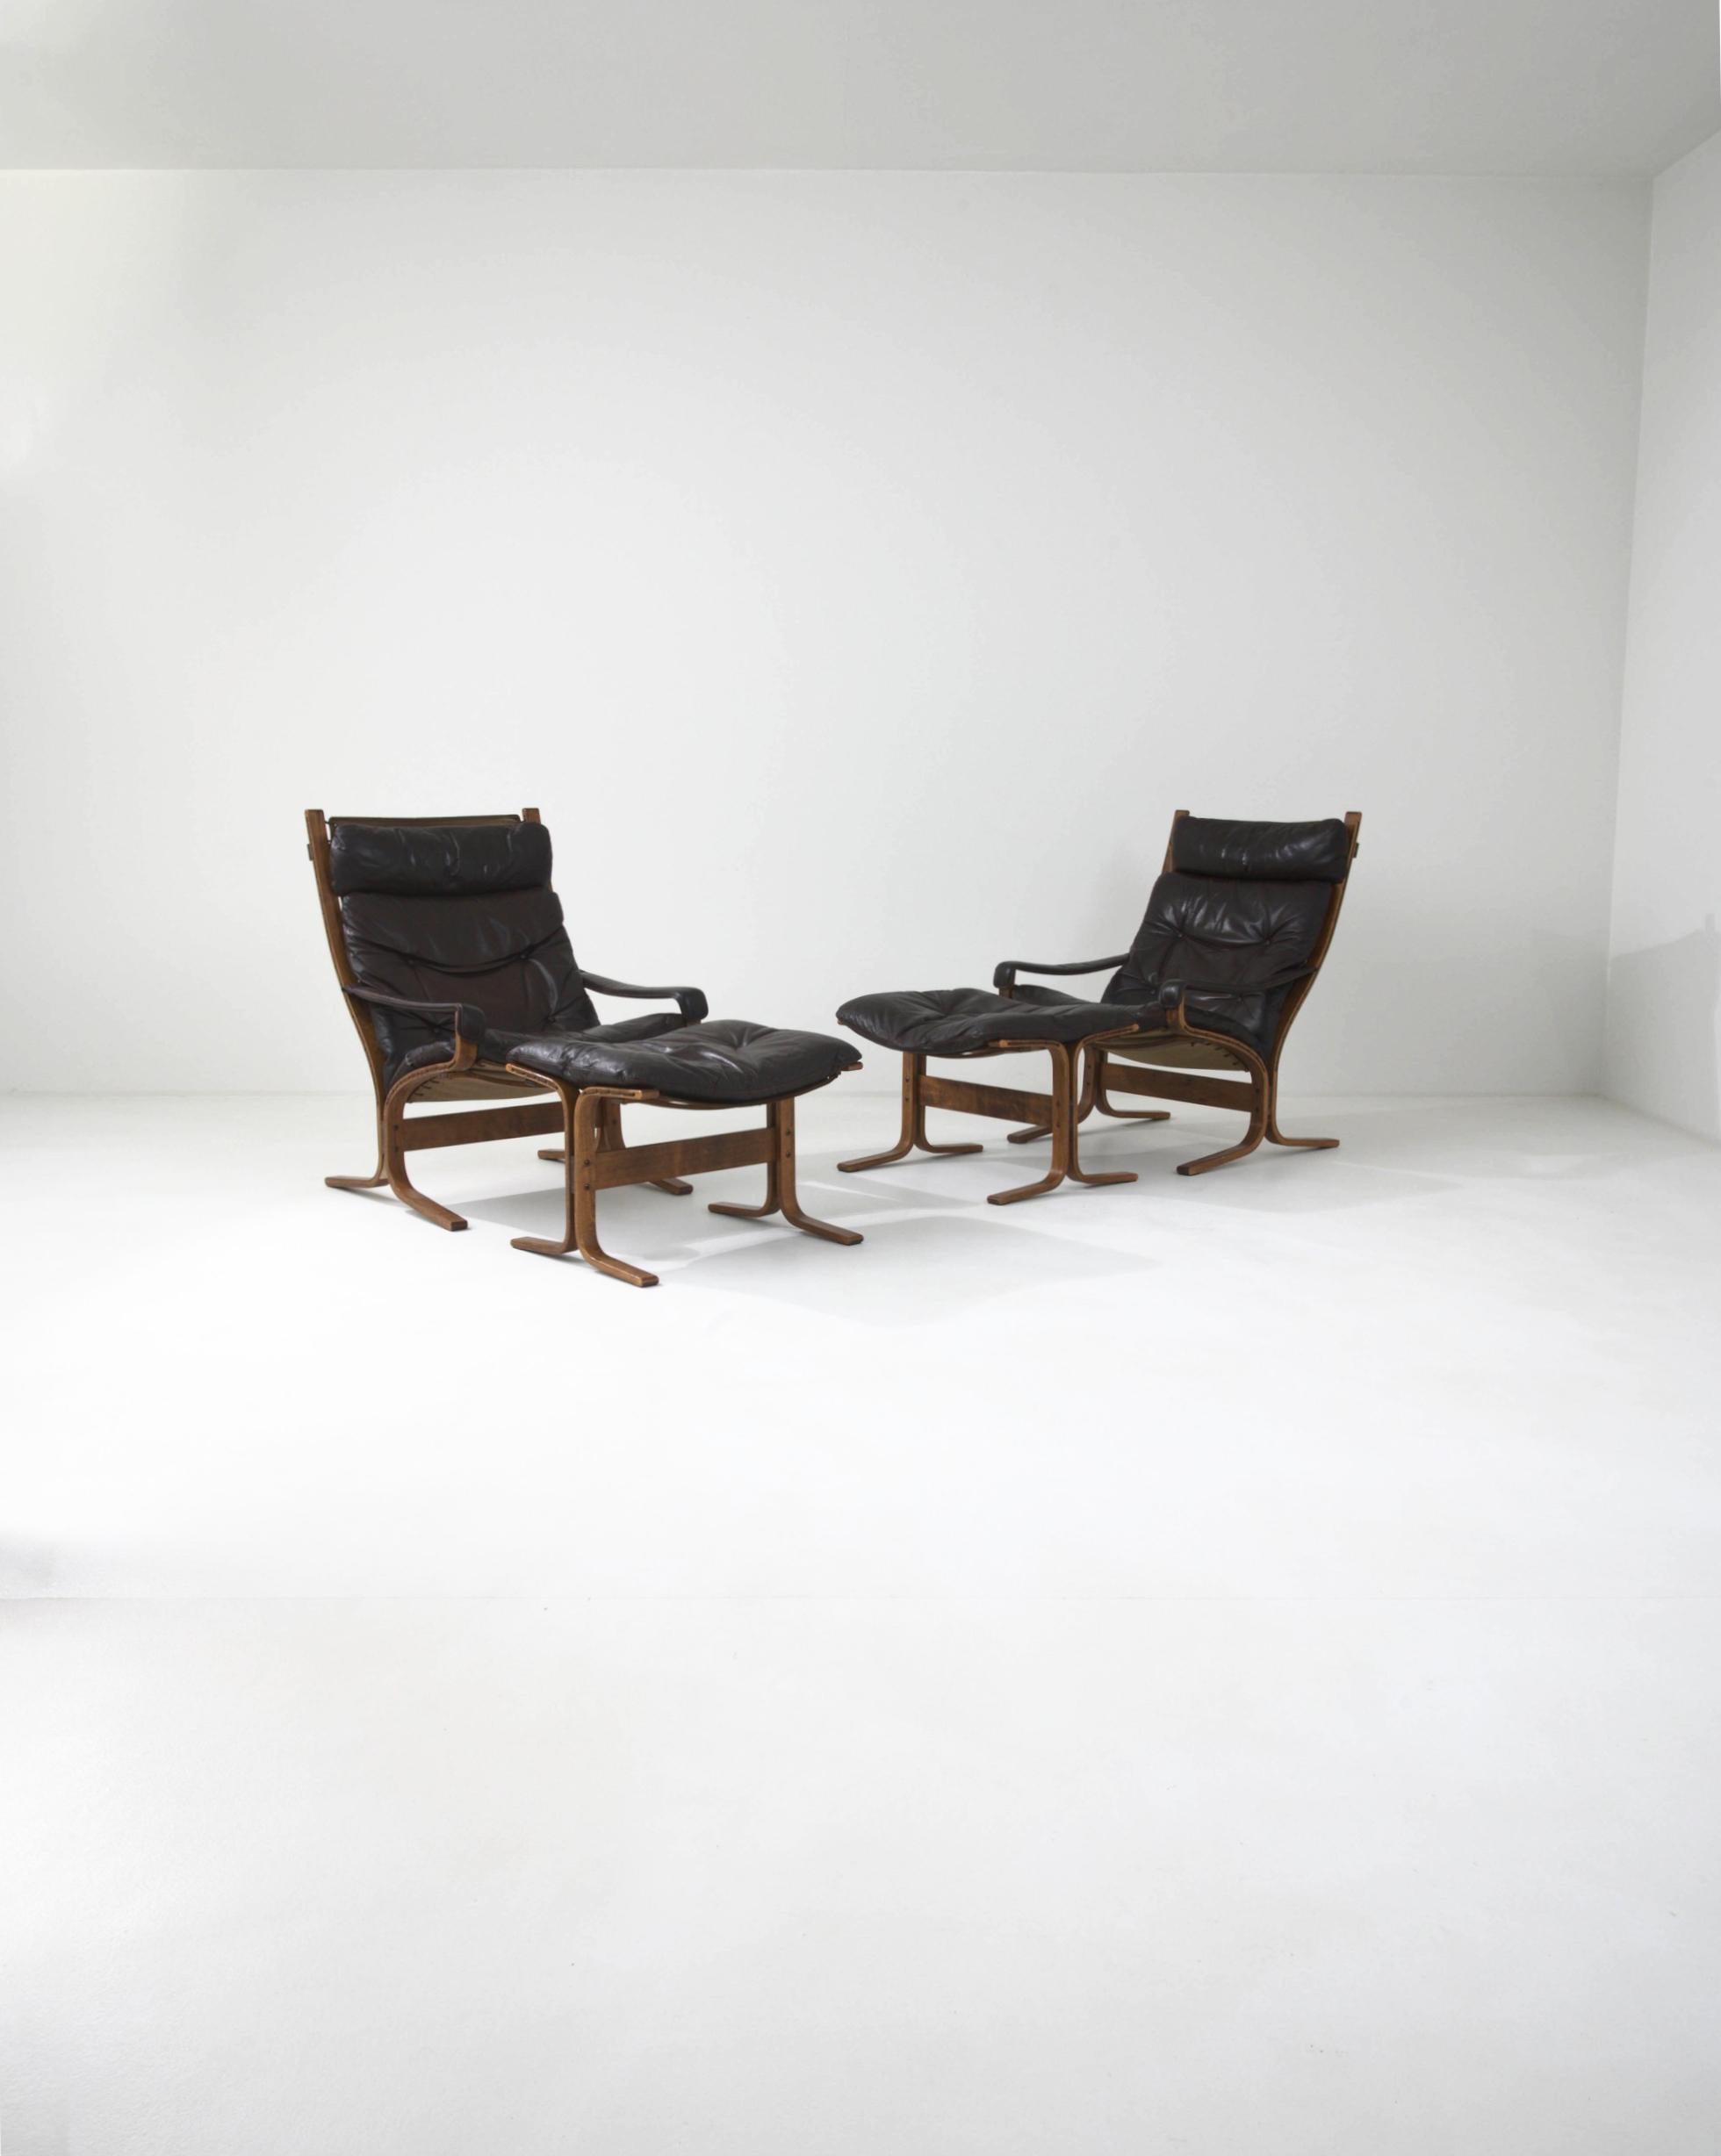 This pair of lounge armchairs with ottomans was designed around the 1960s by Westnofa, a brand known for its association with Norwegian mid-century modern and modernist furniture. The 'Siesta' armchairs feature a curved trestle base that creates a